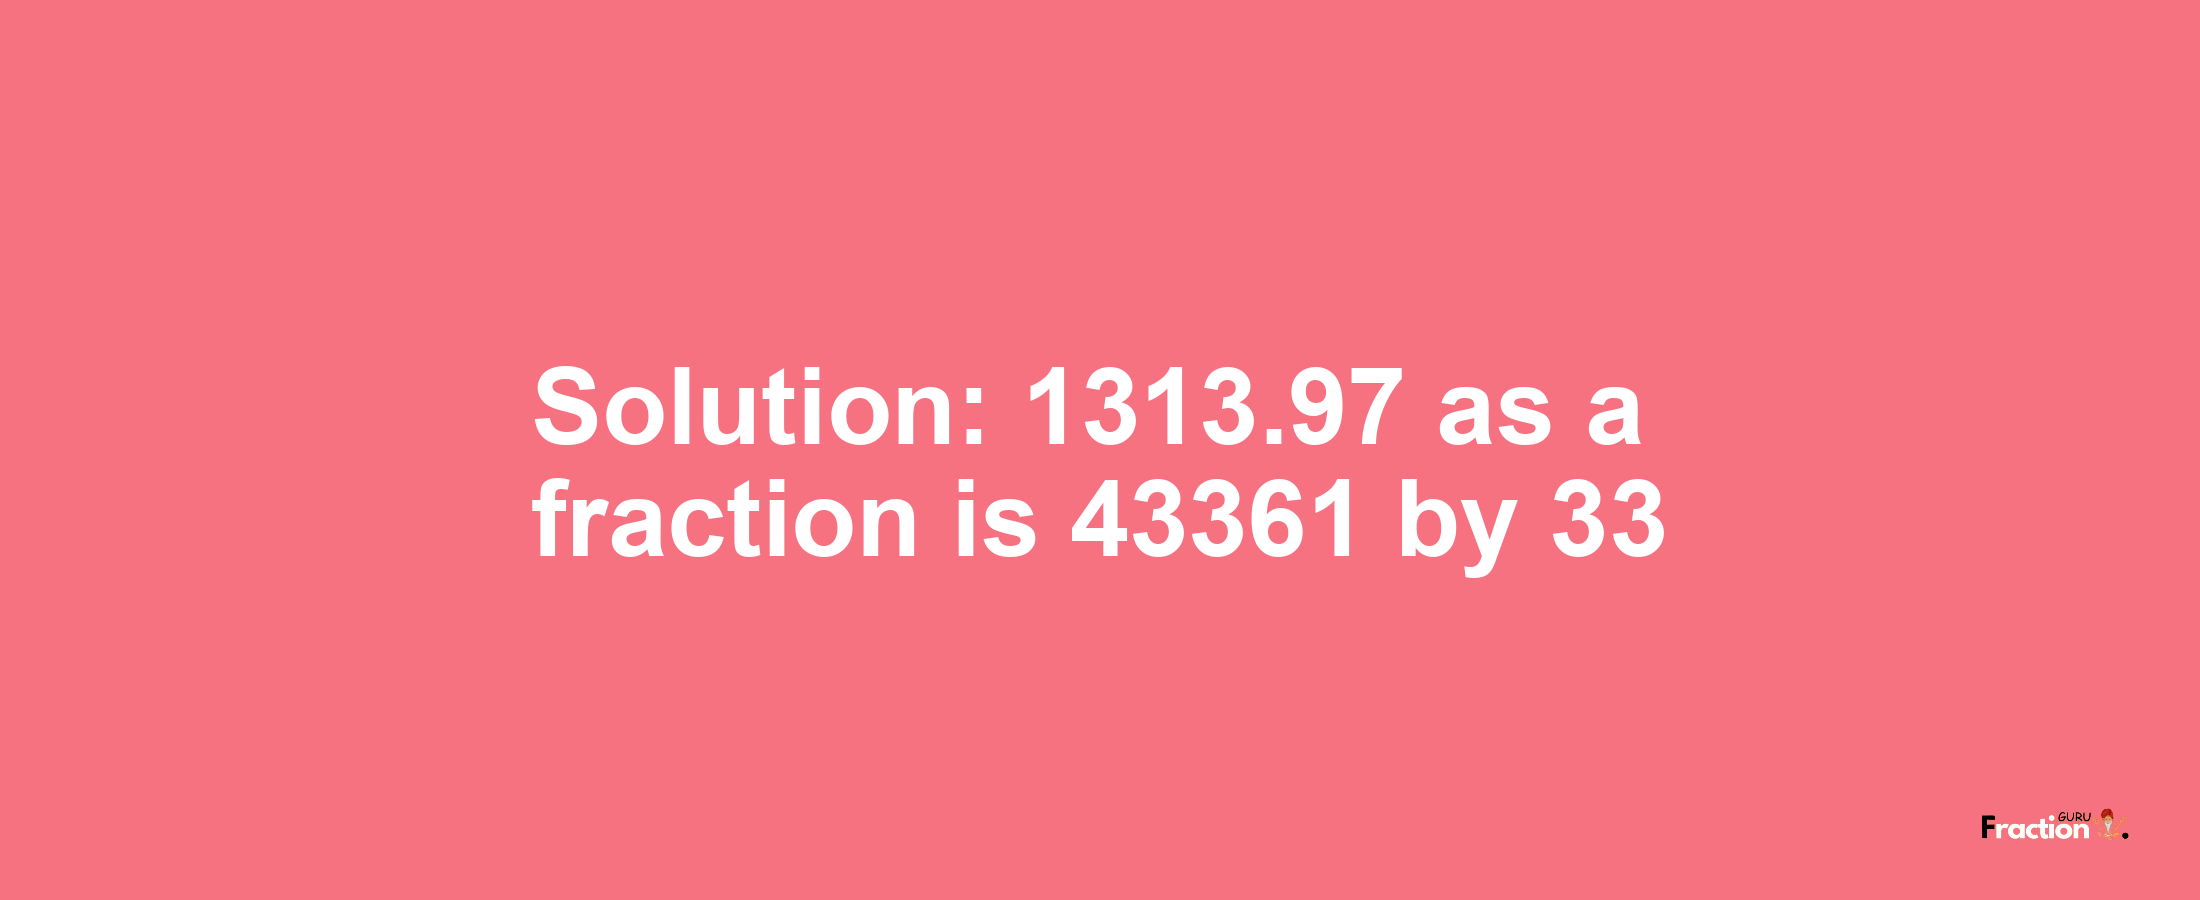 Solution:1313.97 as a fraction is 43361/33